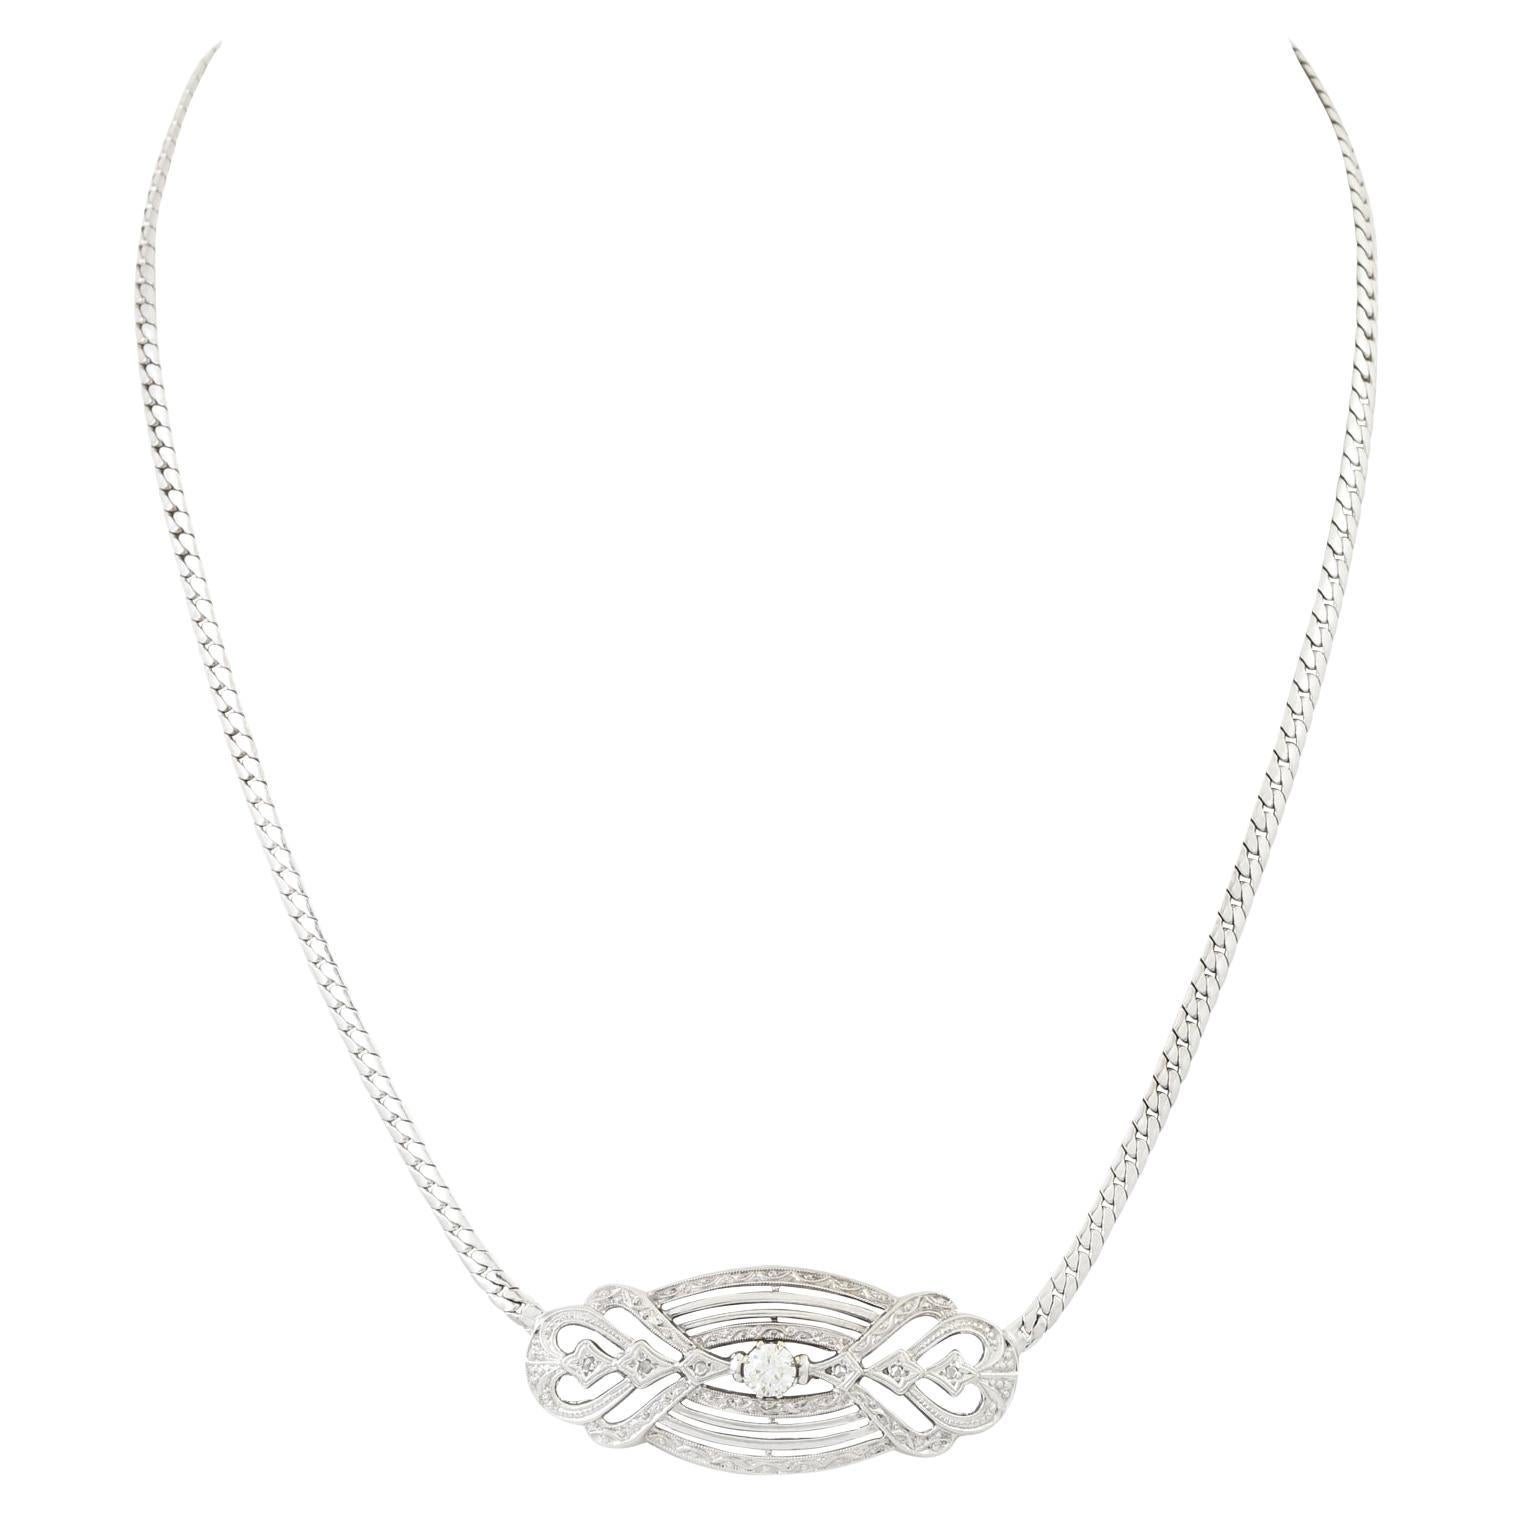 Necklace with Diamonds For Sale